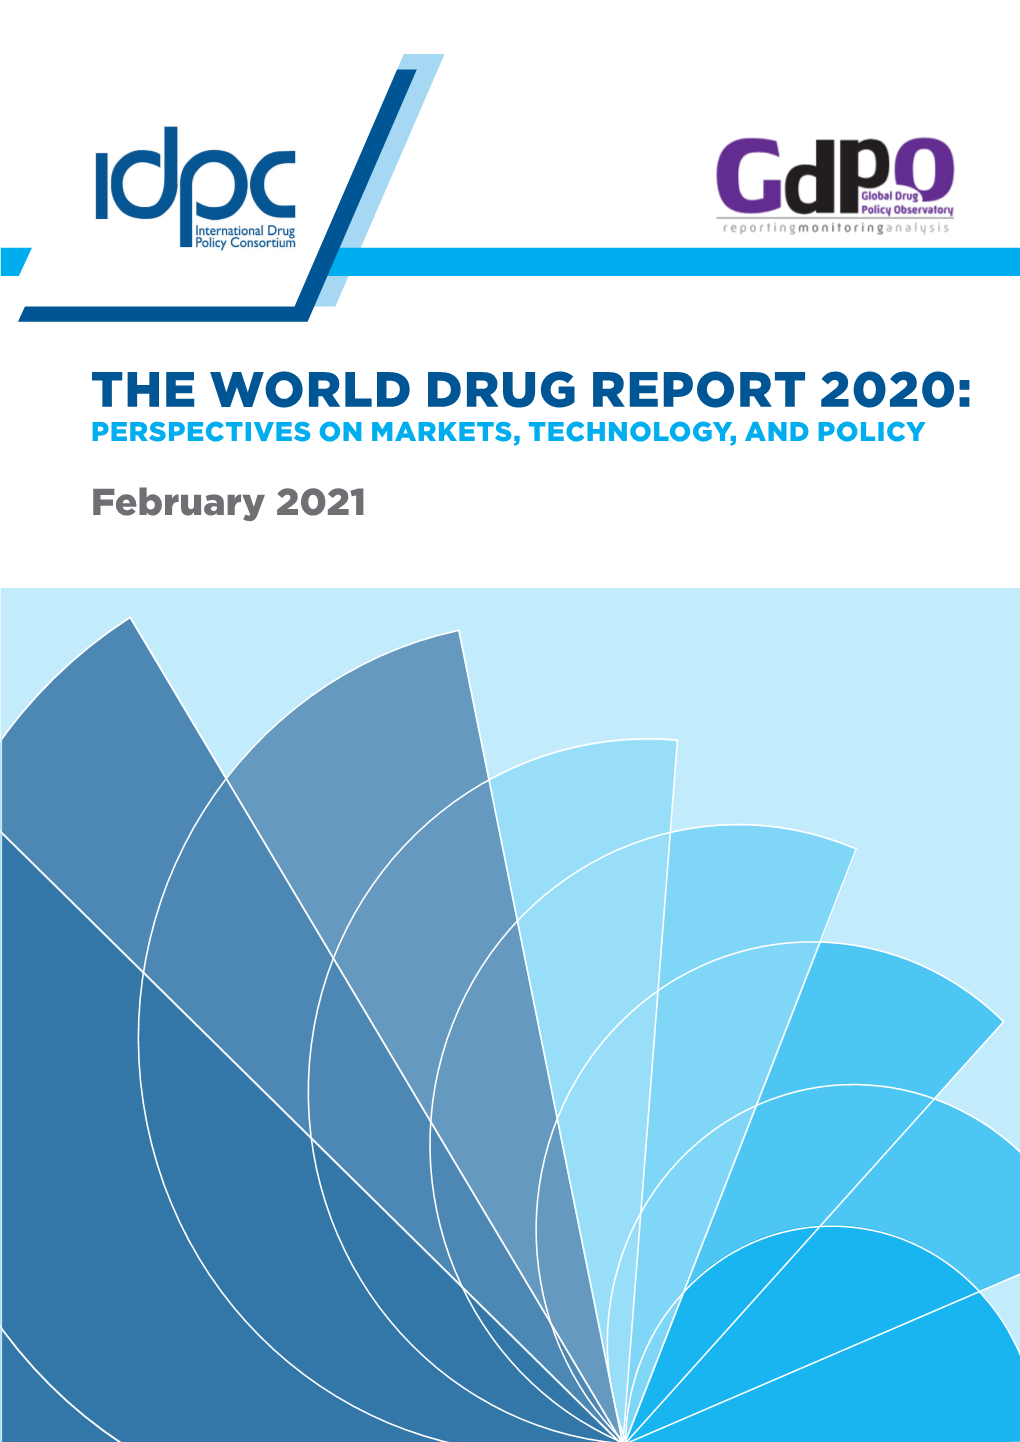 The World Drug Report 2020: Perspectives on Markets, Technology, and Policy